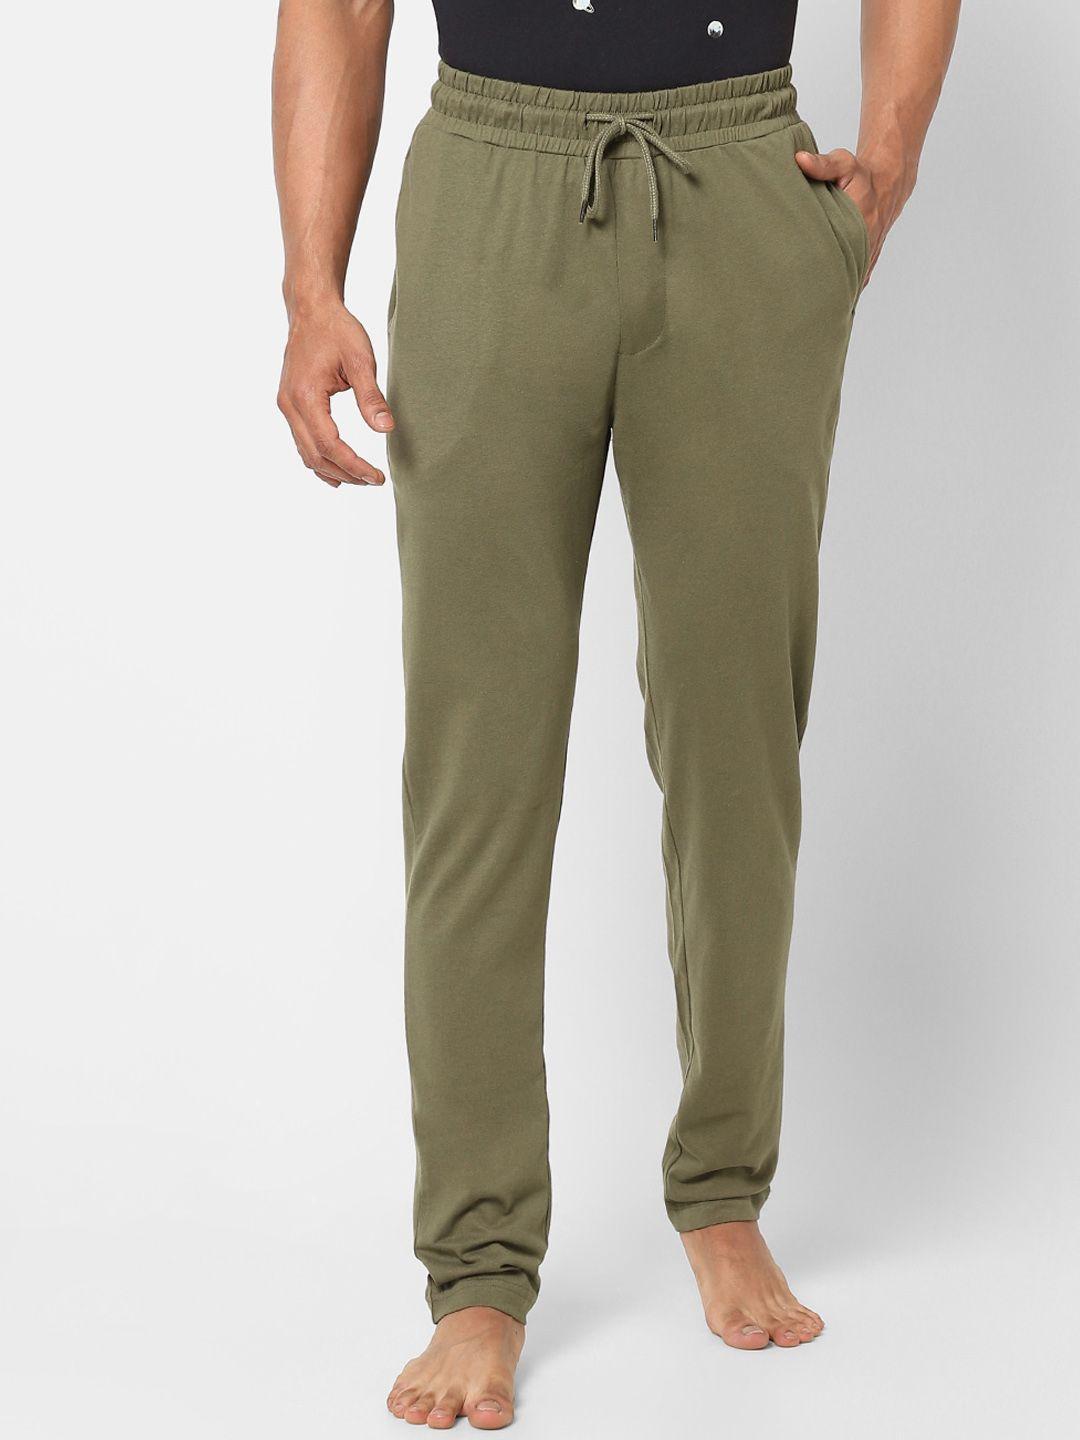 ajile-by-pantaloons-men-olive-green-solid-cotton-lounge-pants